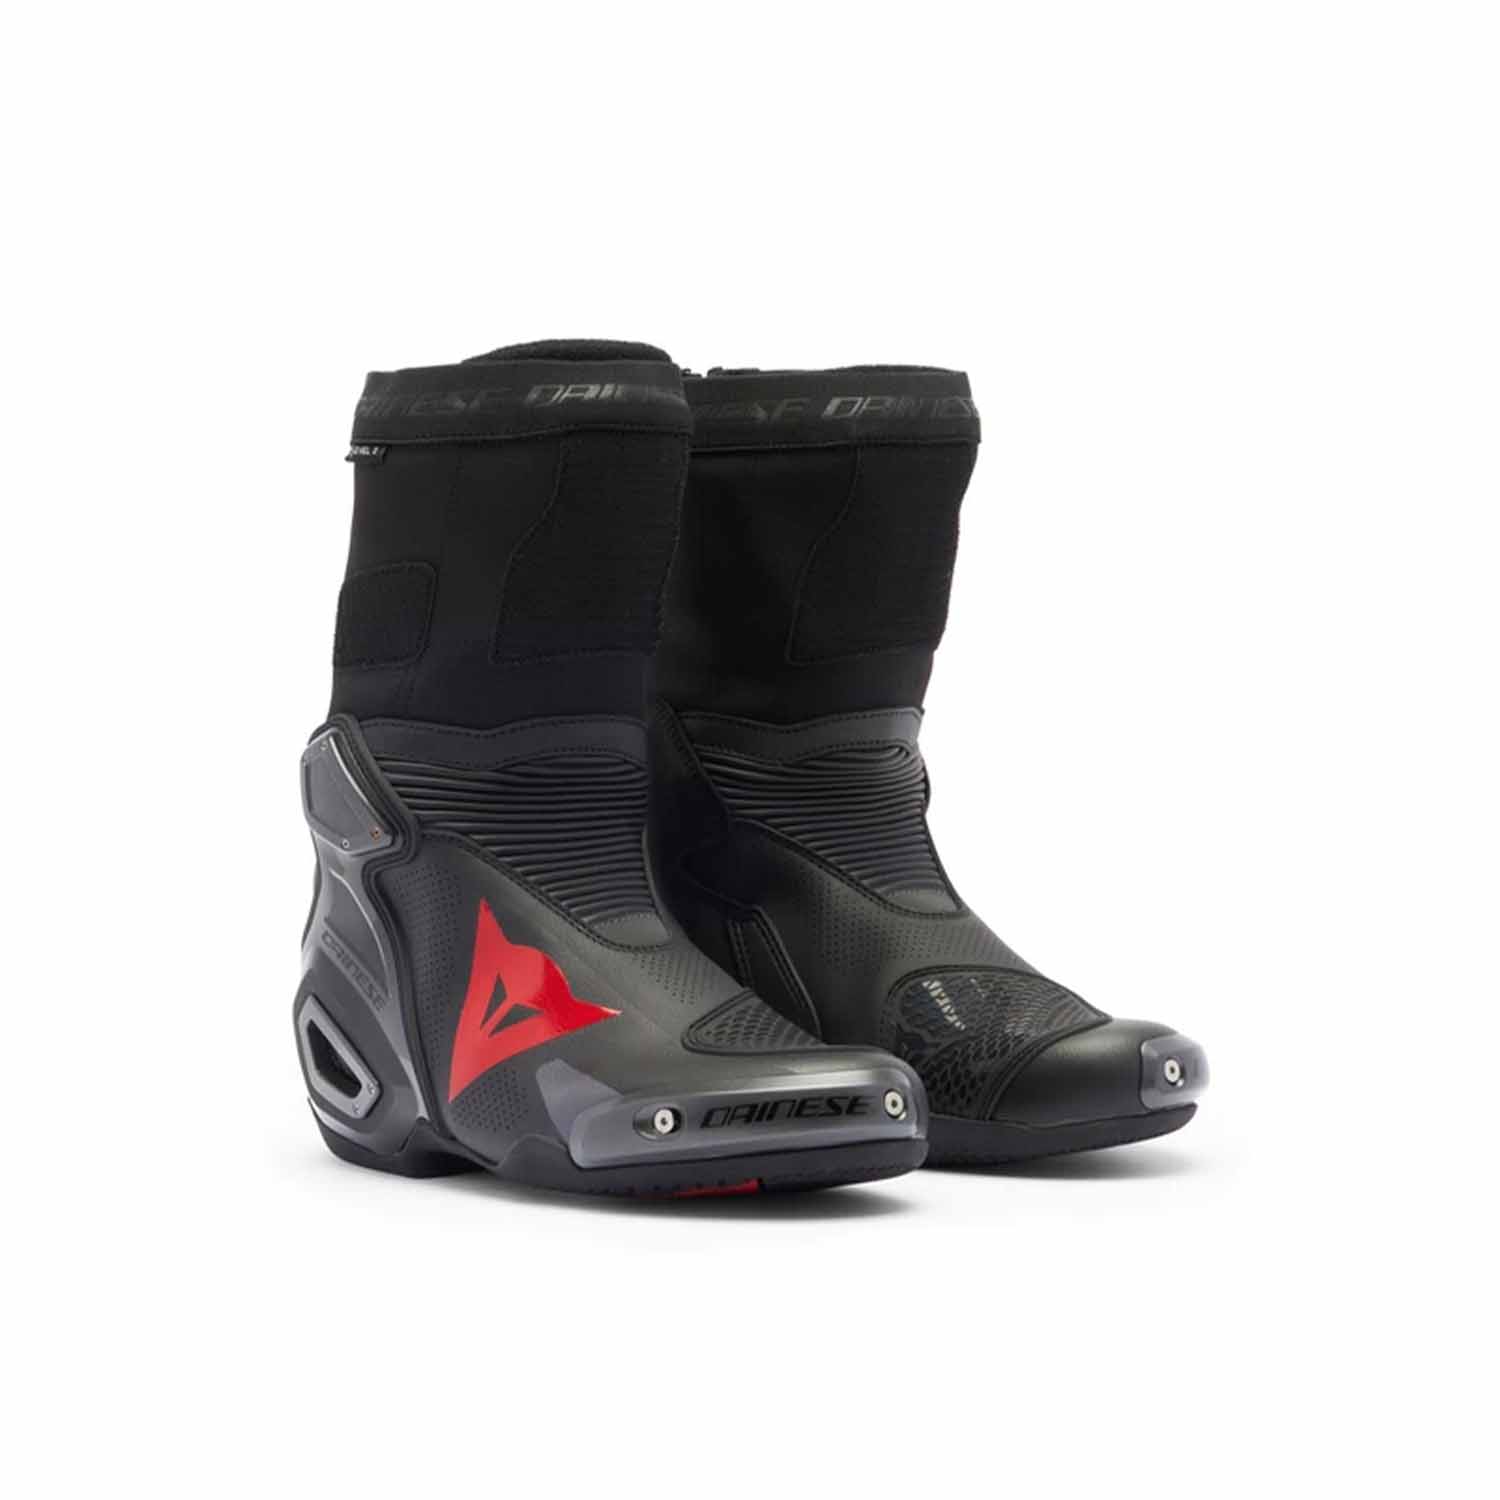 Image of Dainese Axial 2 Air Boots Black Red Fluo Size 40 EN